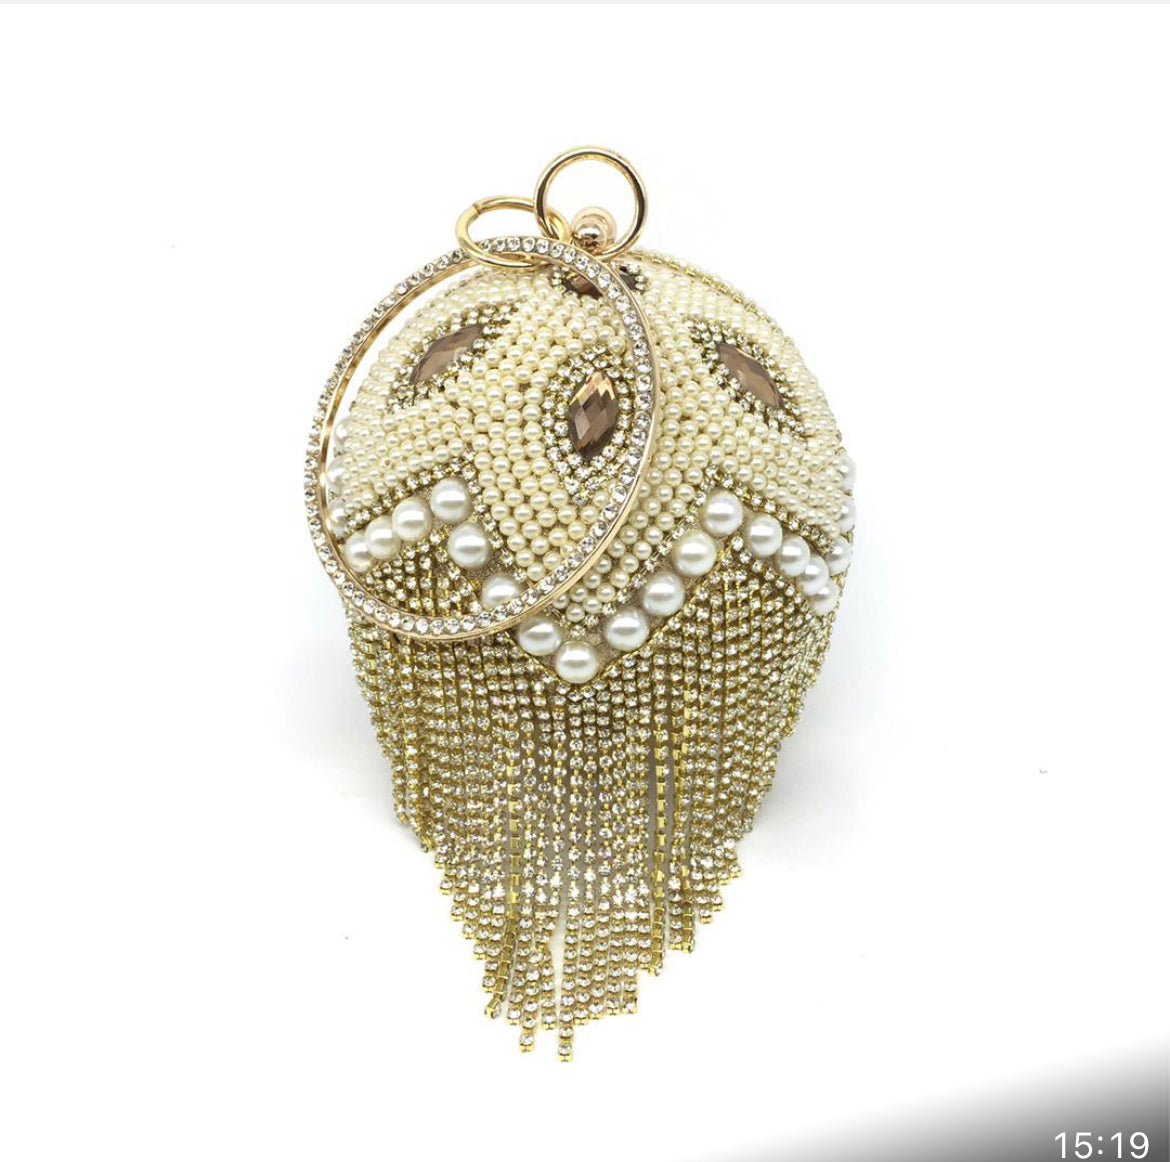 Women's Sparkling Pearl Studed Ball Shape Clutch Bag.